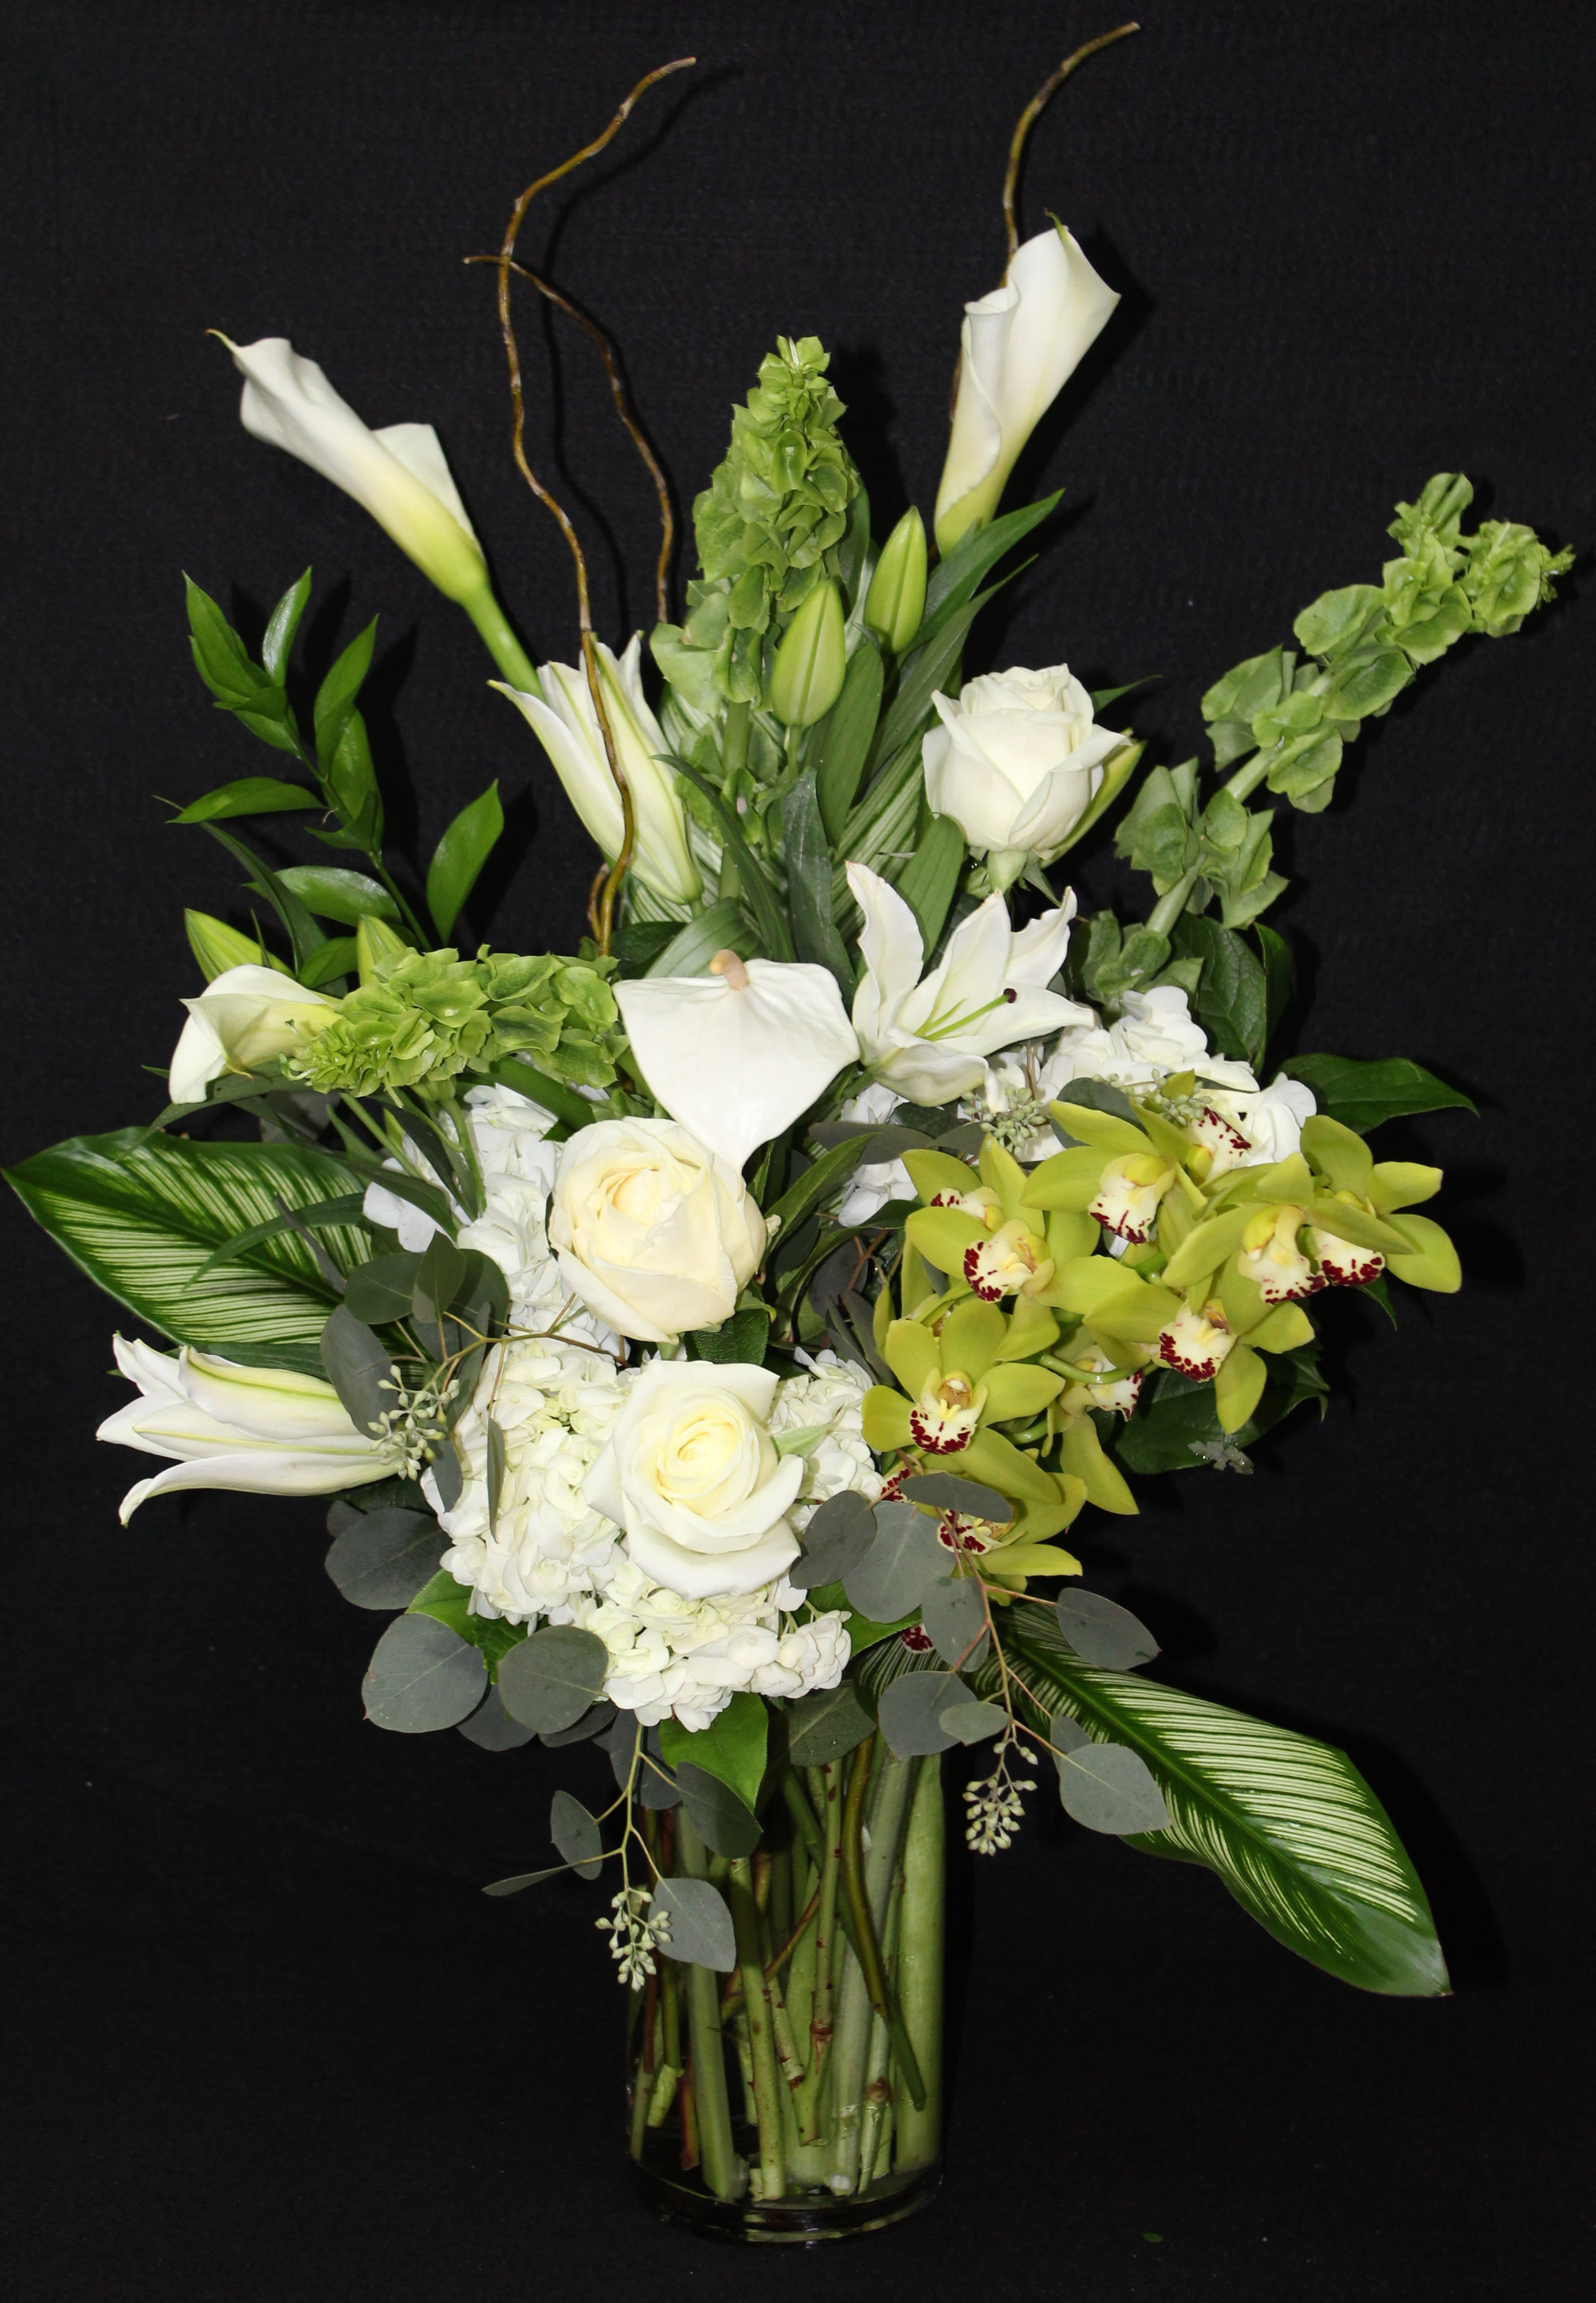 Sophisticated Elegance - Show them you have great taste with this arrangement of white roses, calla lilies, stargazer lilies, green cymbidium orchids, bells or Ireland among greens.